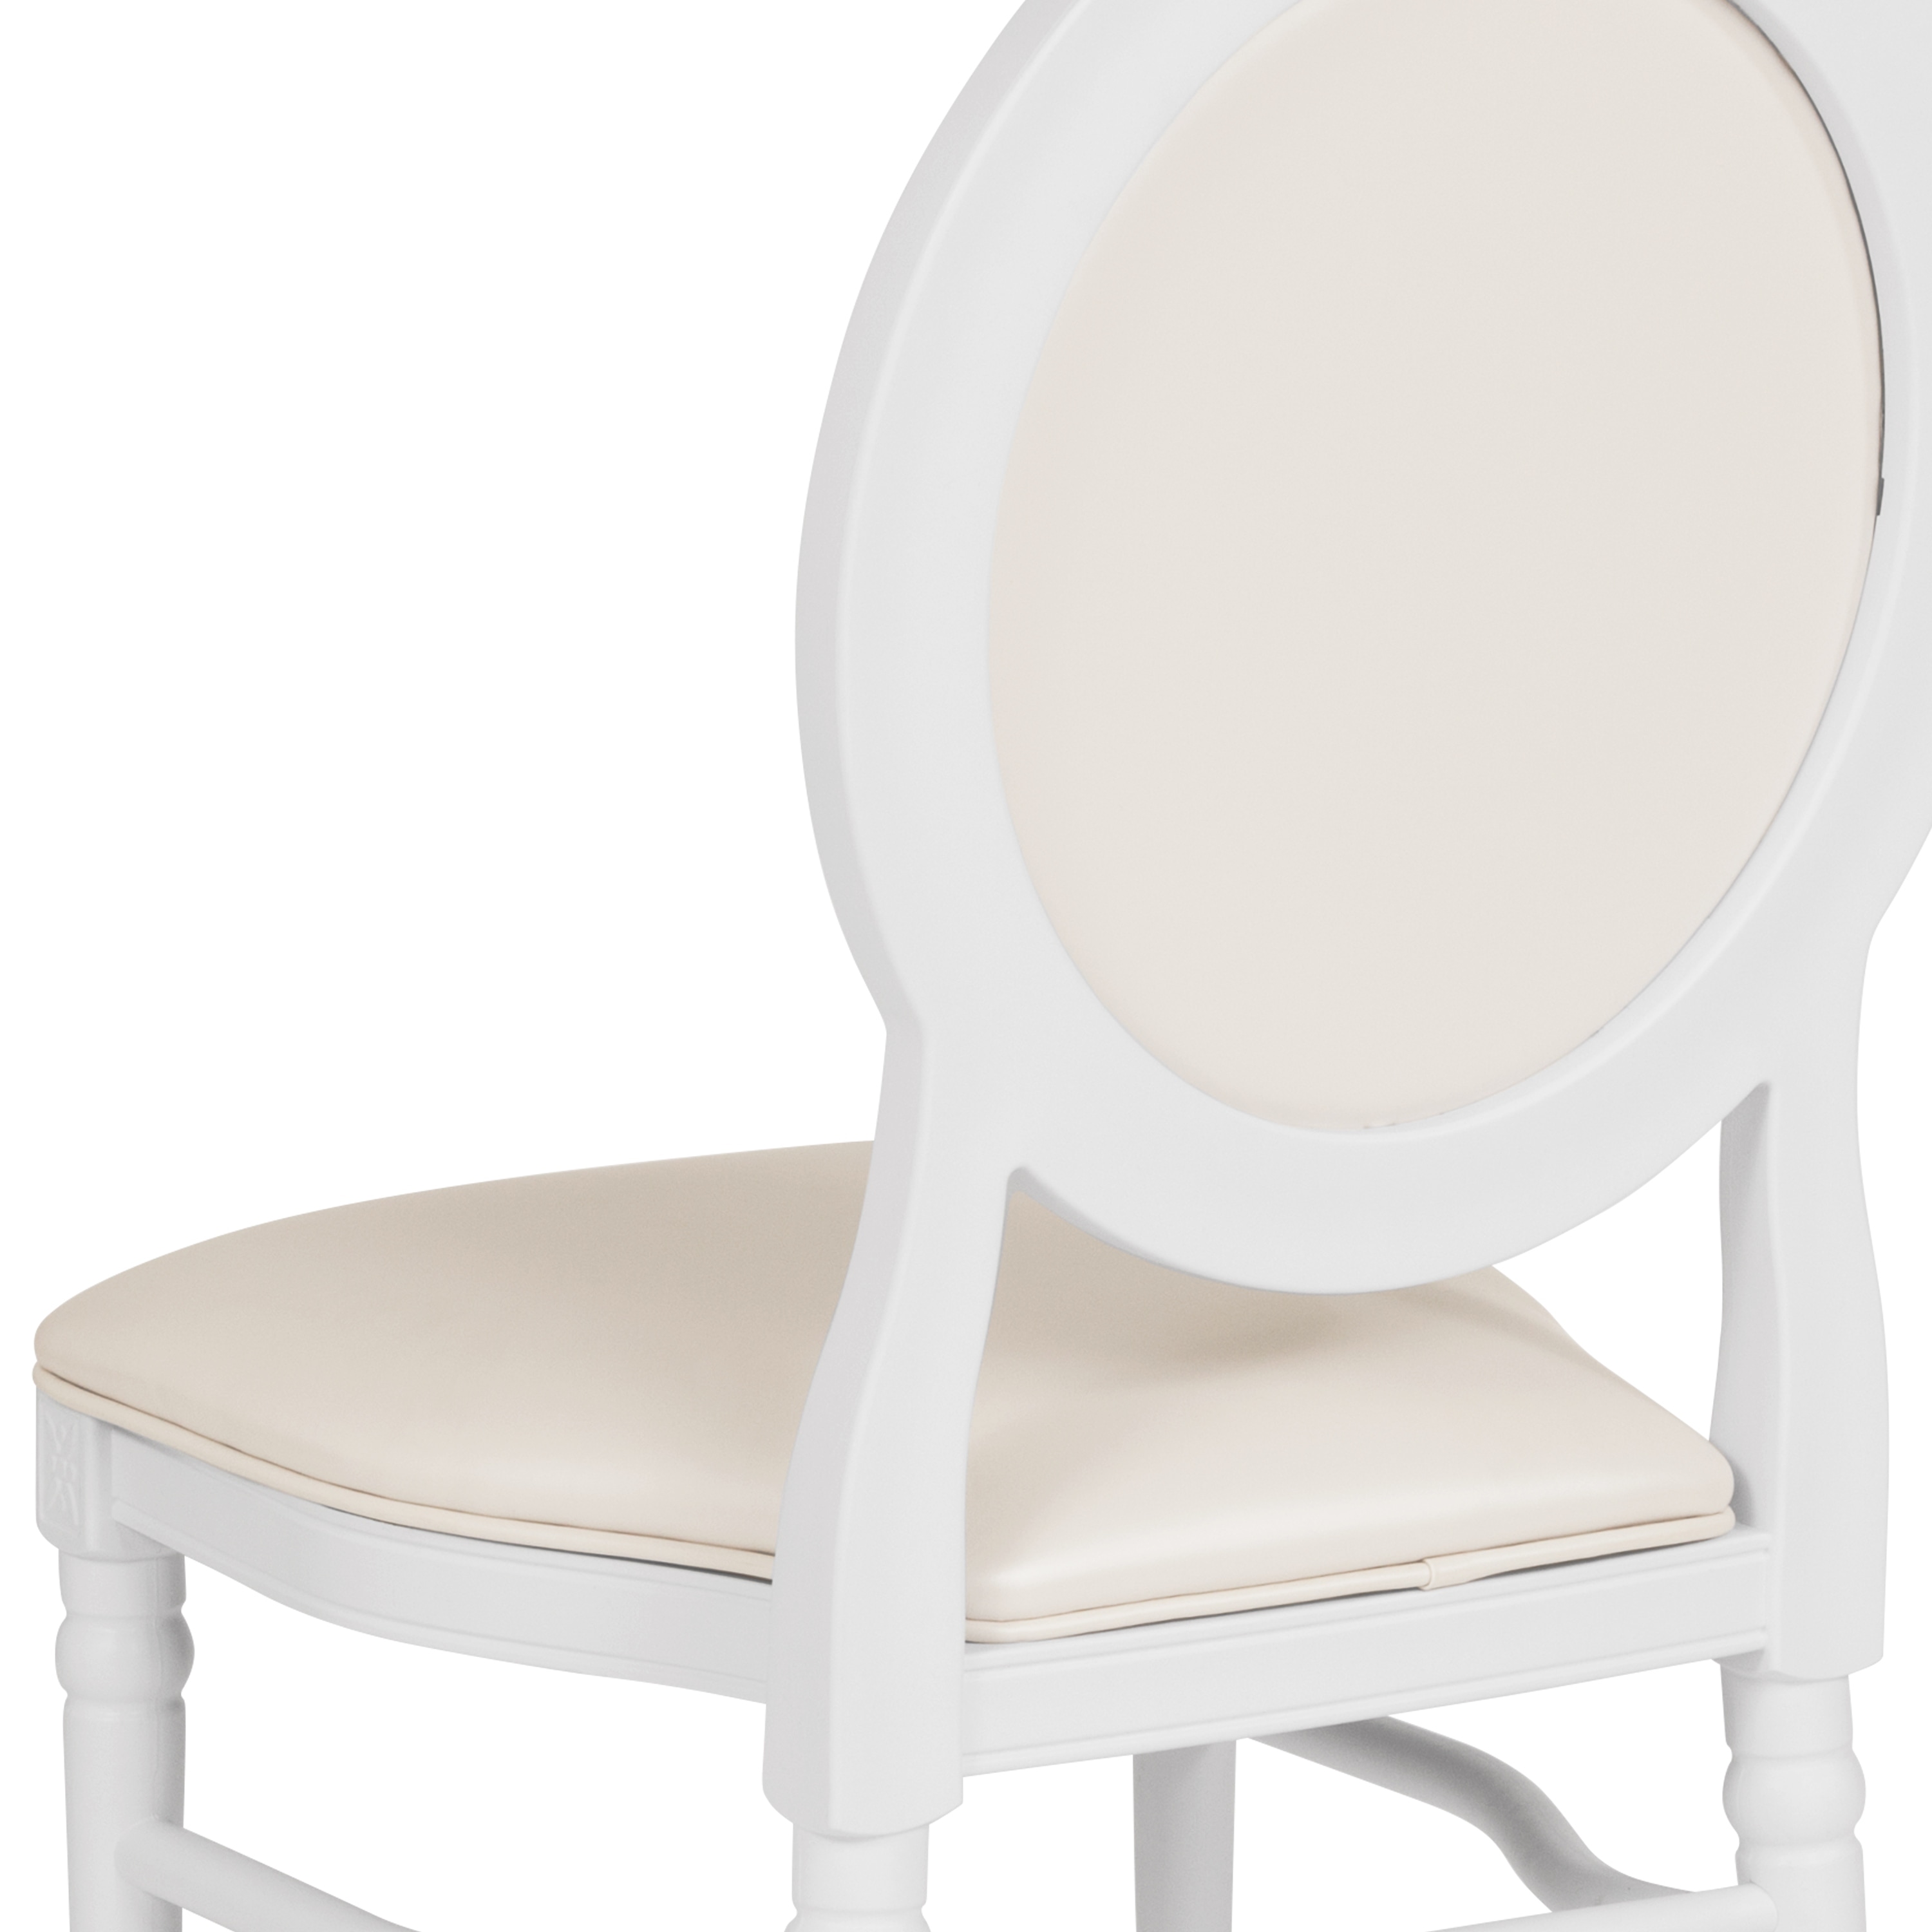 Rolesville King Louis Back Arm Chair, Weight Capacity: 300 lb., Main  Material: Plastic 